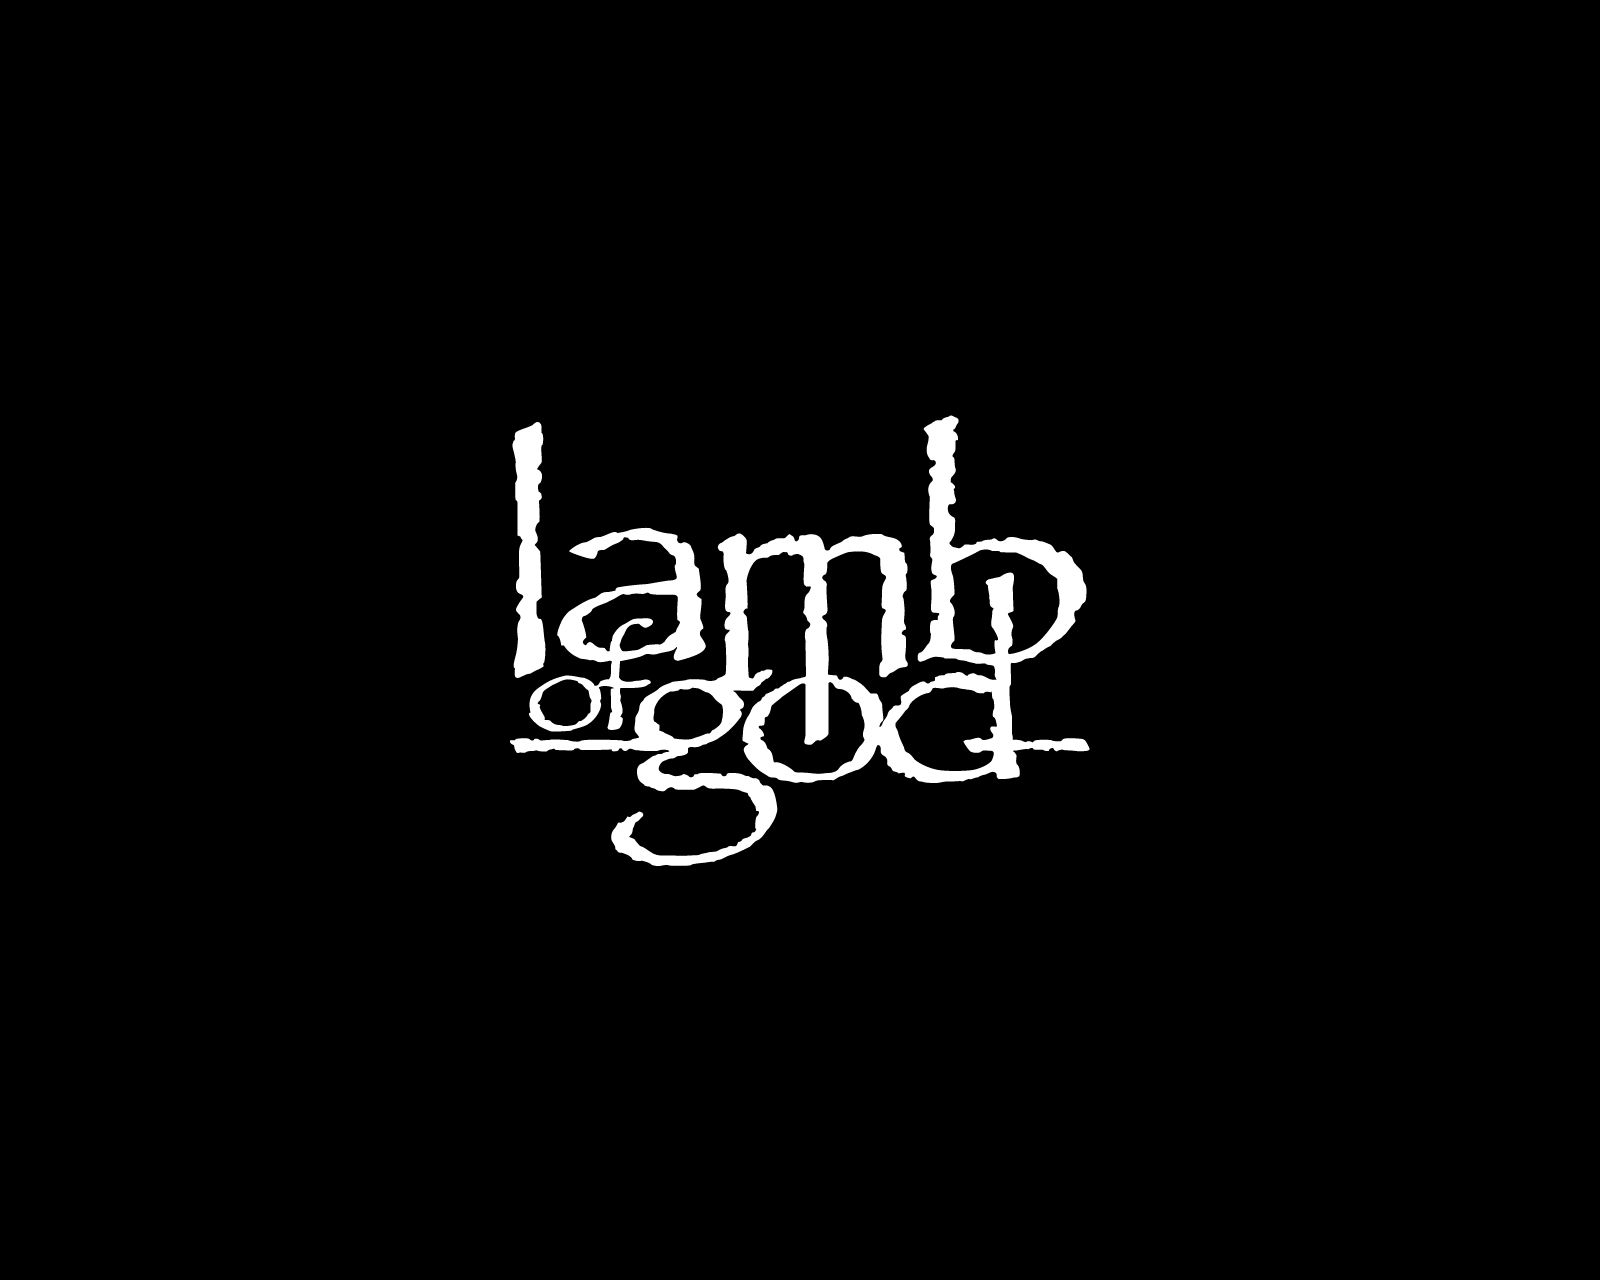 13 Lamb Of God Wallpapers | HD Backgrounds - Wallpaper Abyss